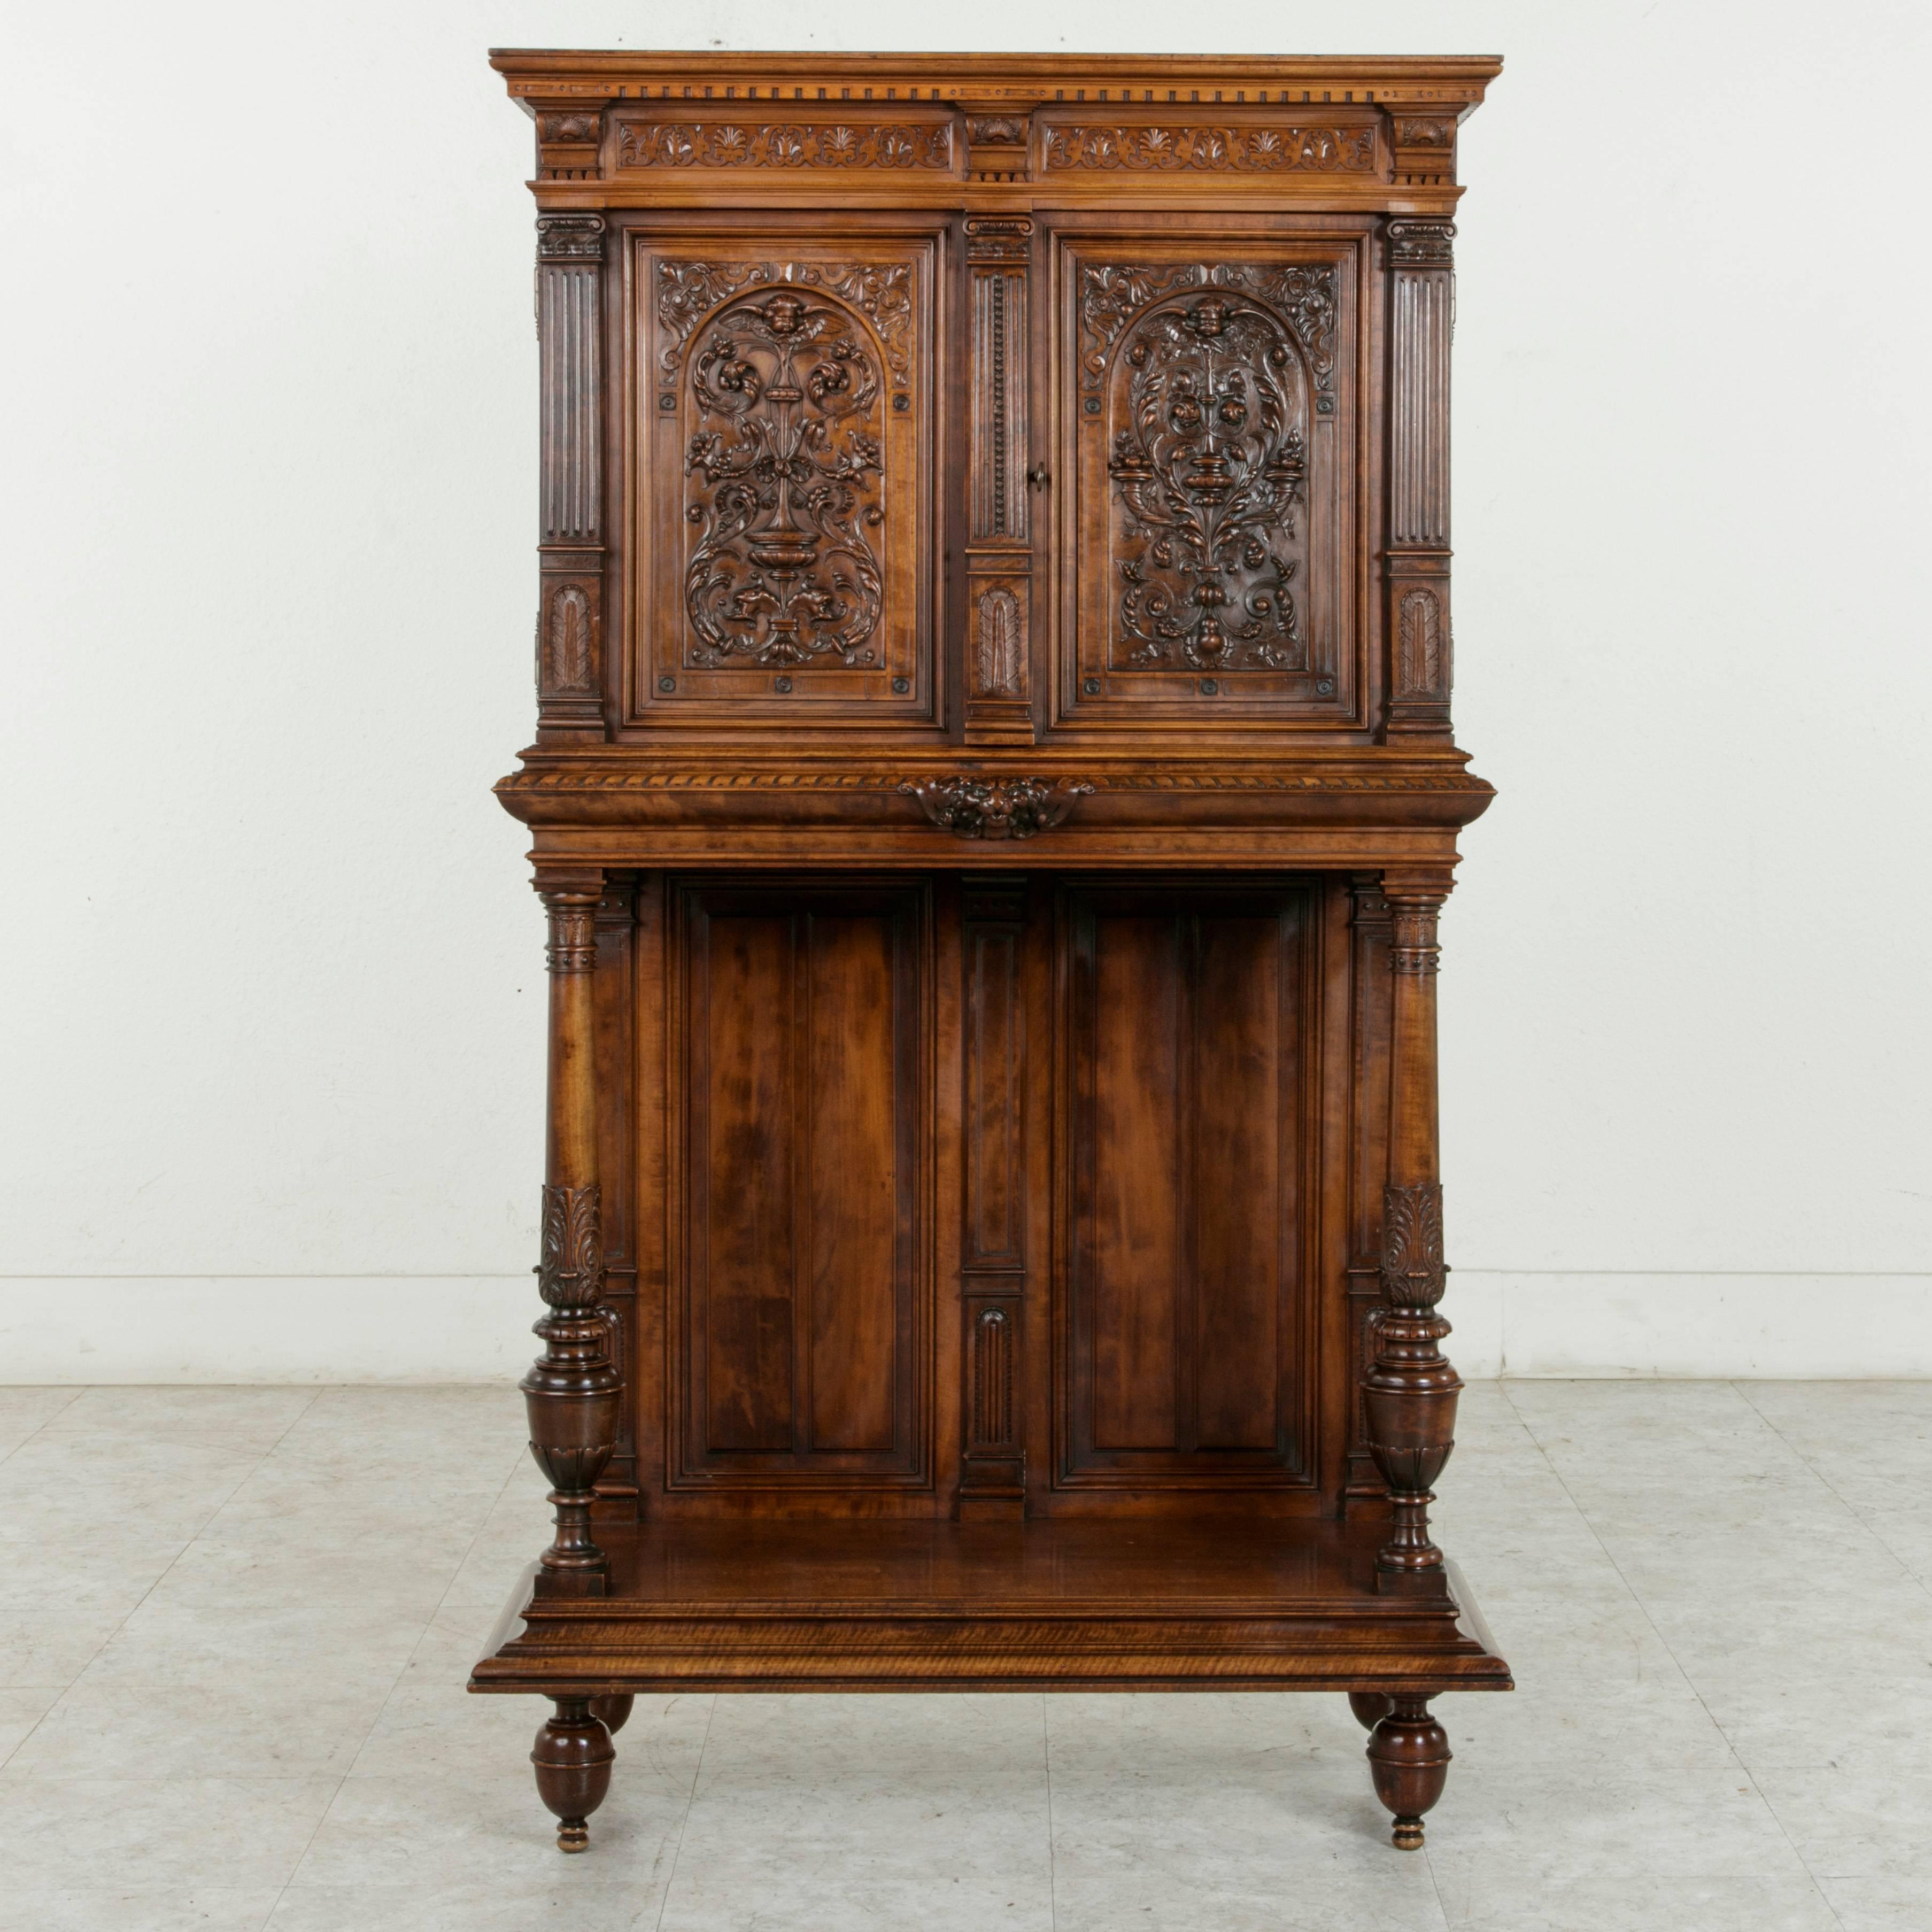 A finely hand-carved piece from the late 19th century, this French walnut Renaissance style cabinet features an upper compartment detailed with three fluted square ionic columns. The two doors of the upper cabinet are lavishly hand-carved with